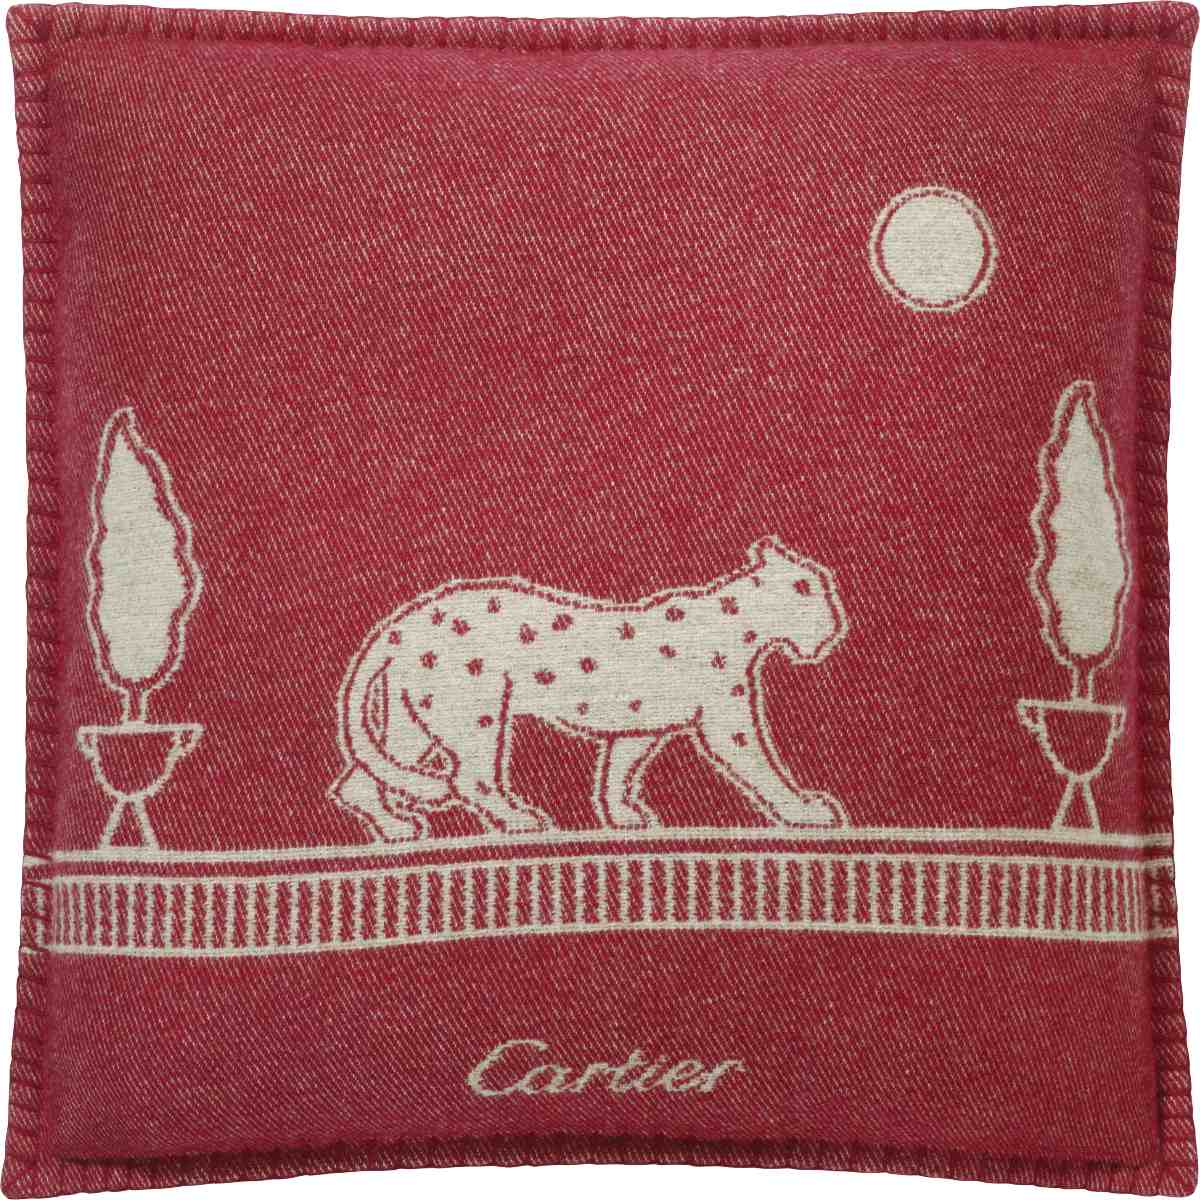 Wishlist Special: Cartier Objects Bear A Sense Of Excitement